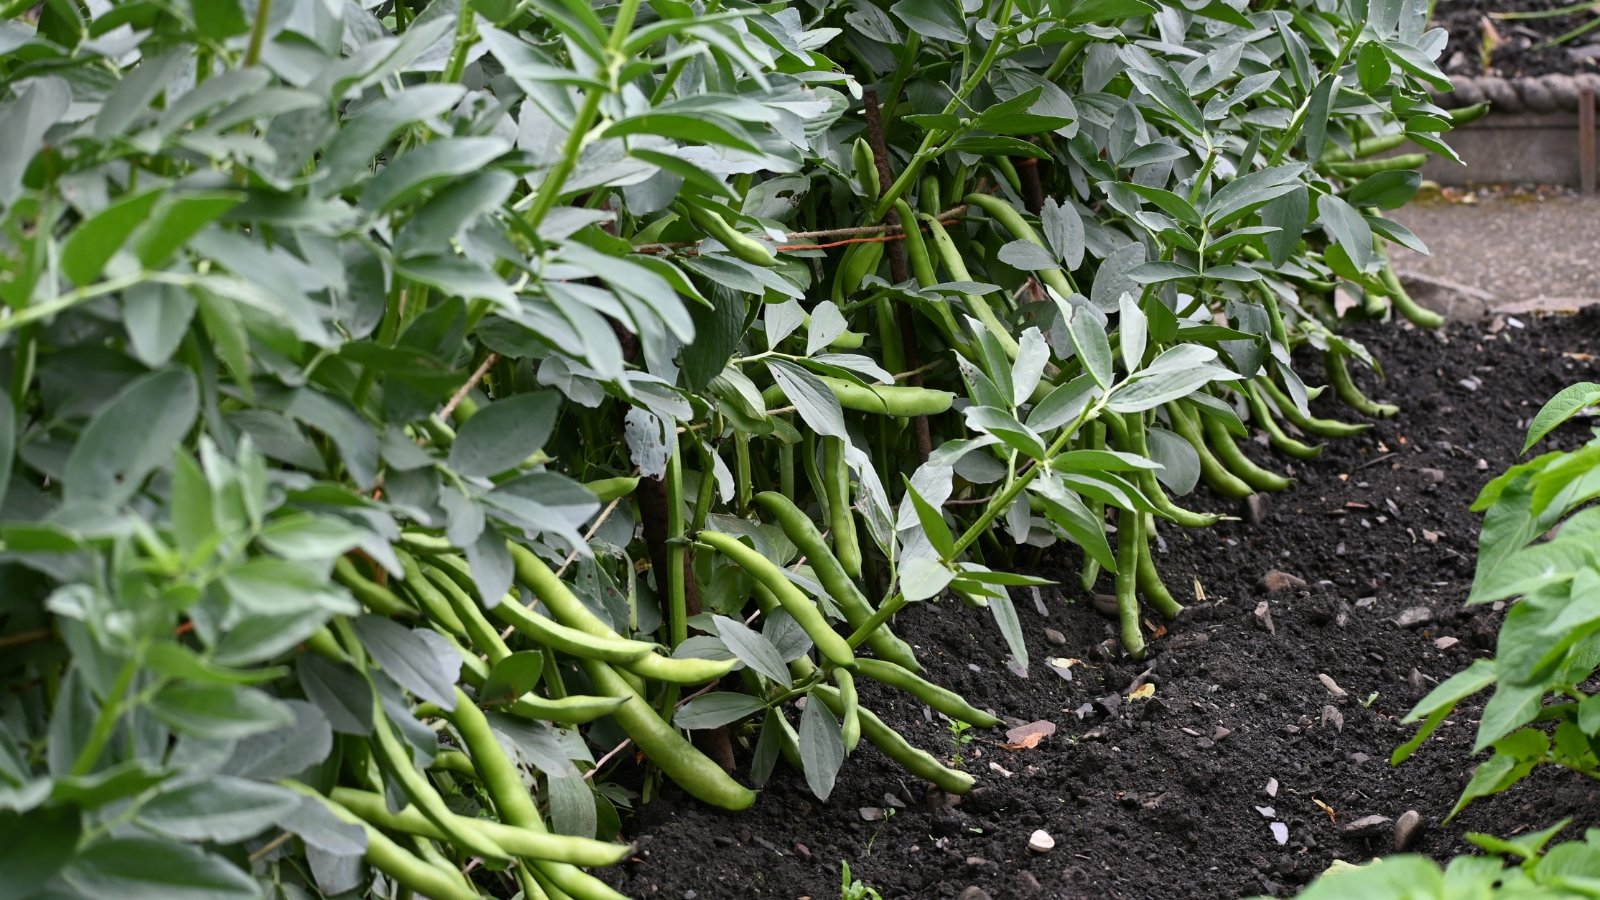 Green beans growing off a bush in the garden with dark and moist soil